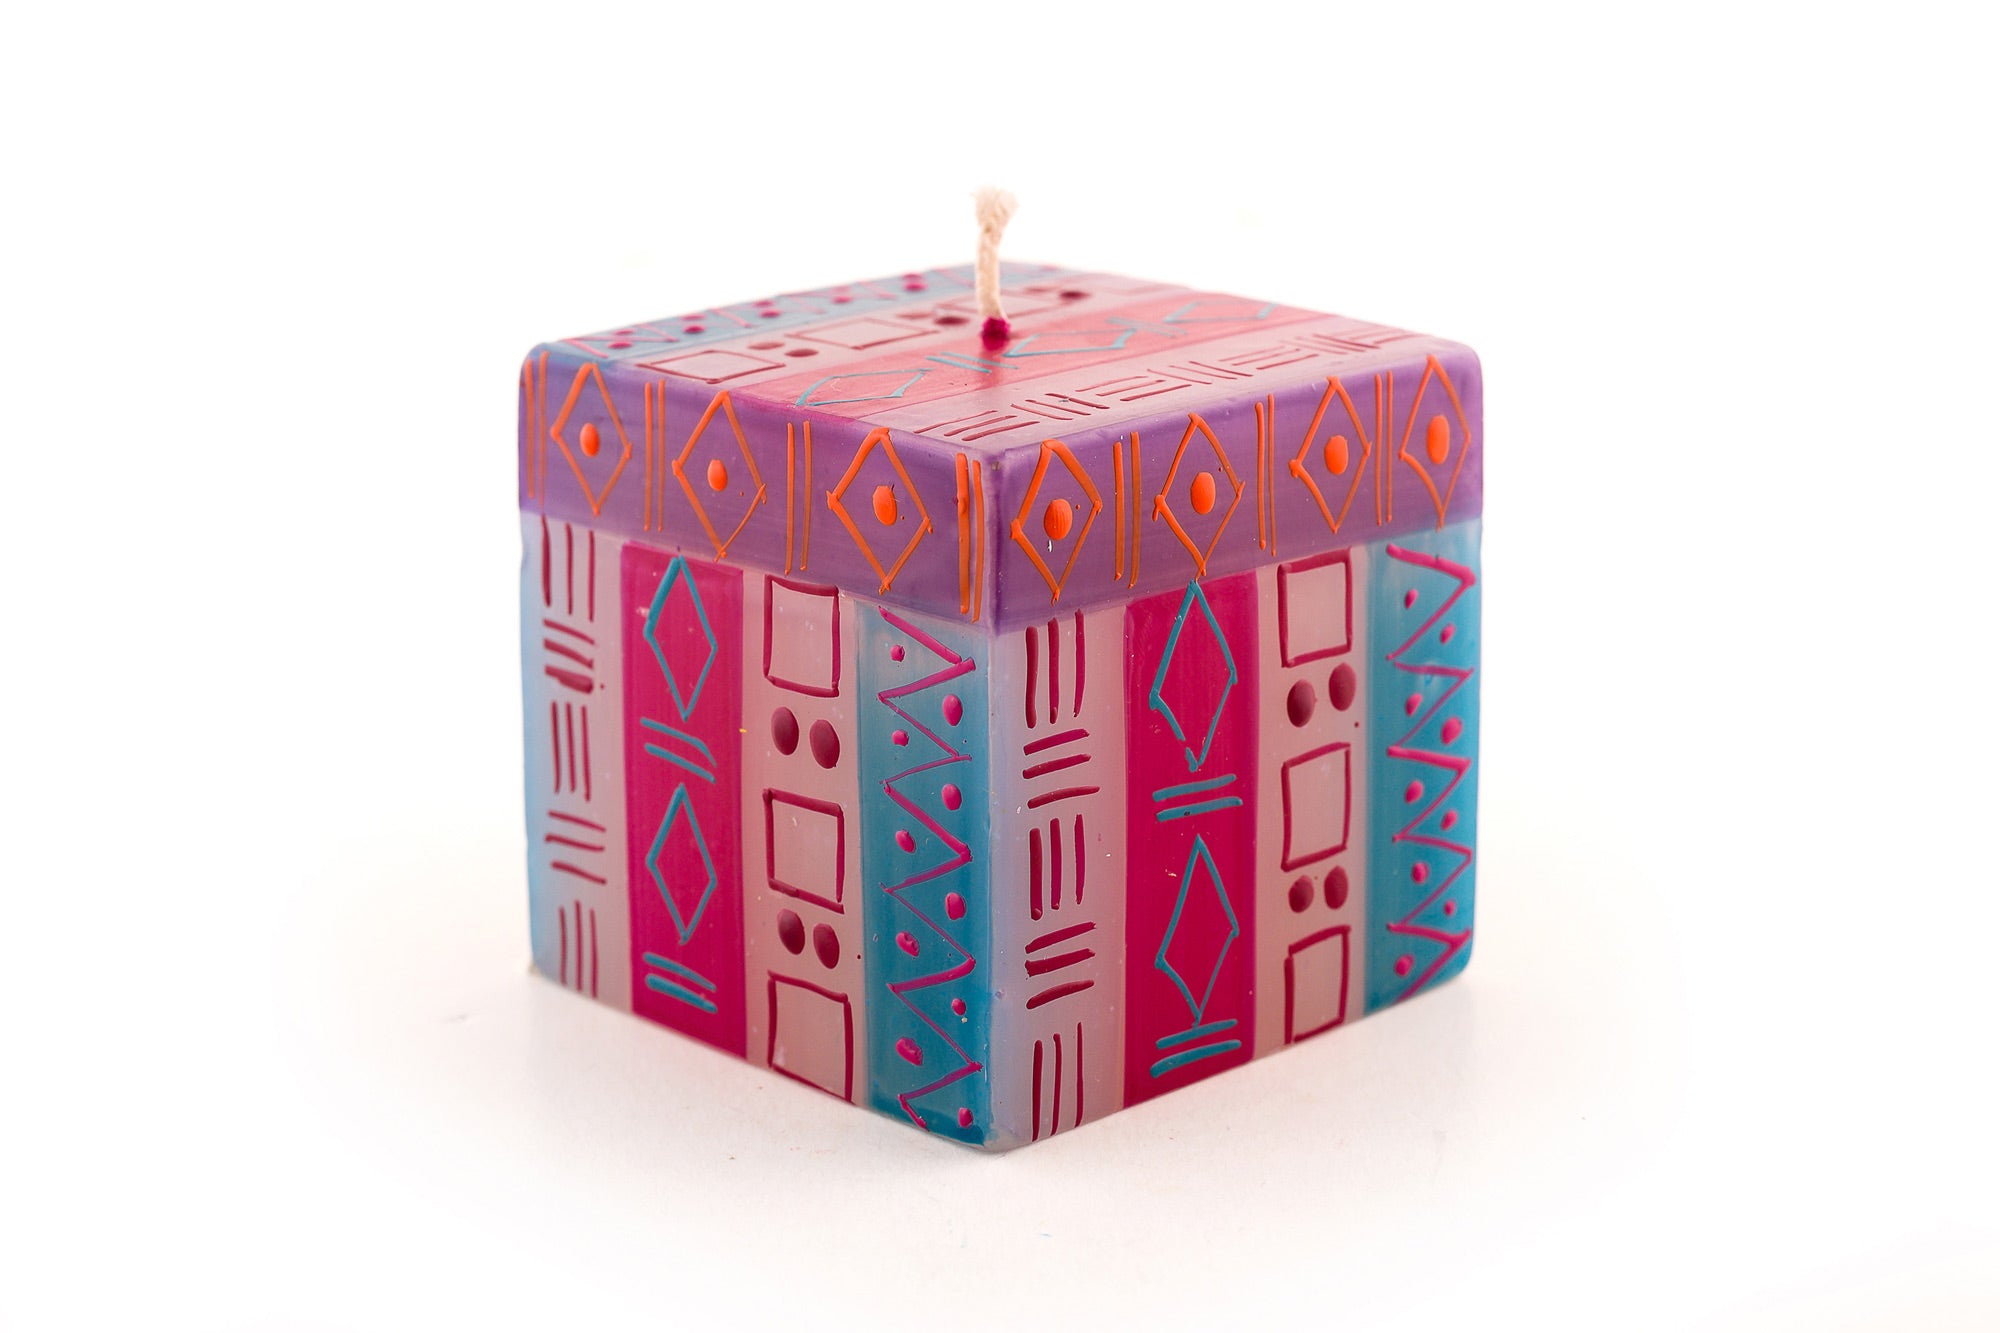 Blue Moon 3x3x3 cube. Turquoise, fuchsia, and purple with touch of orange.